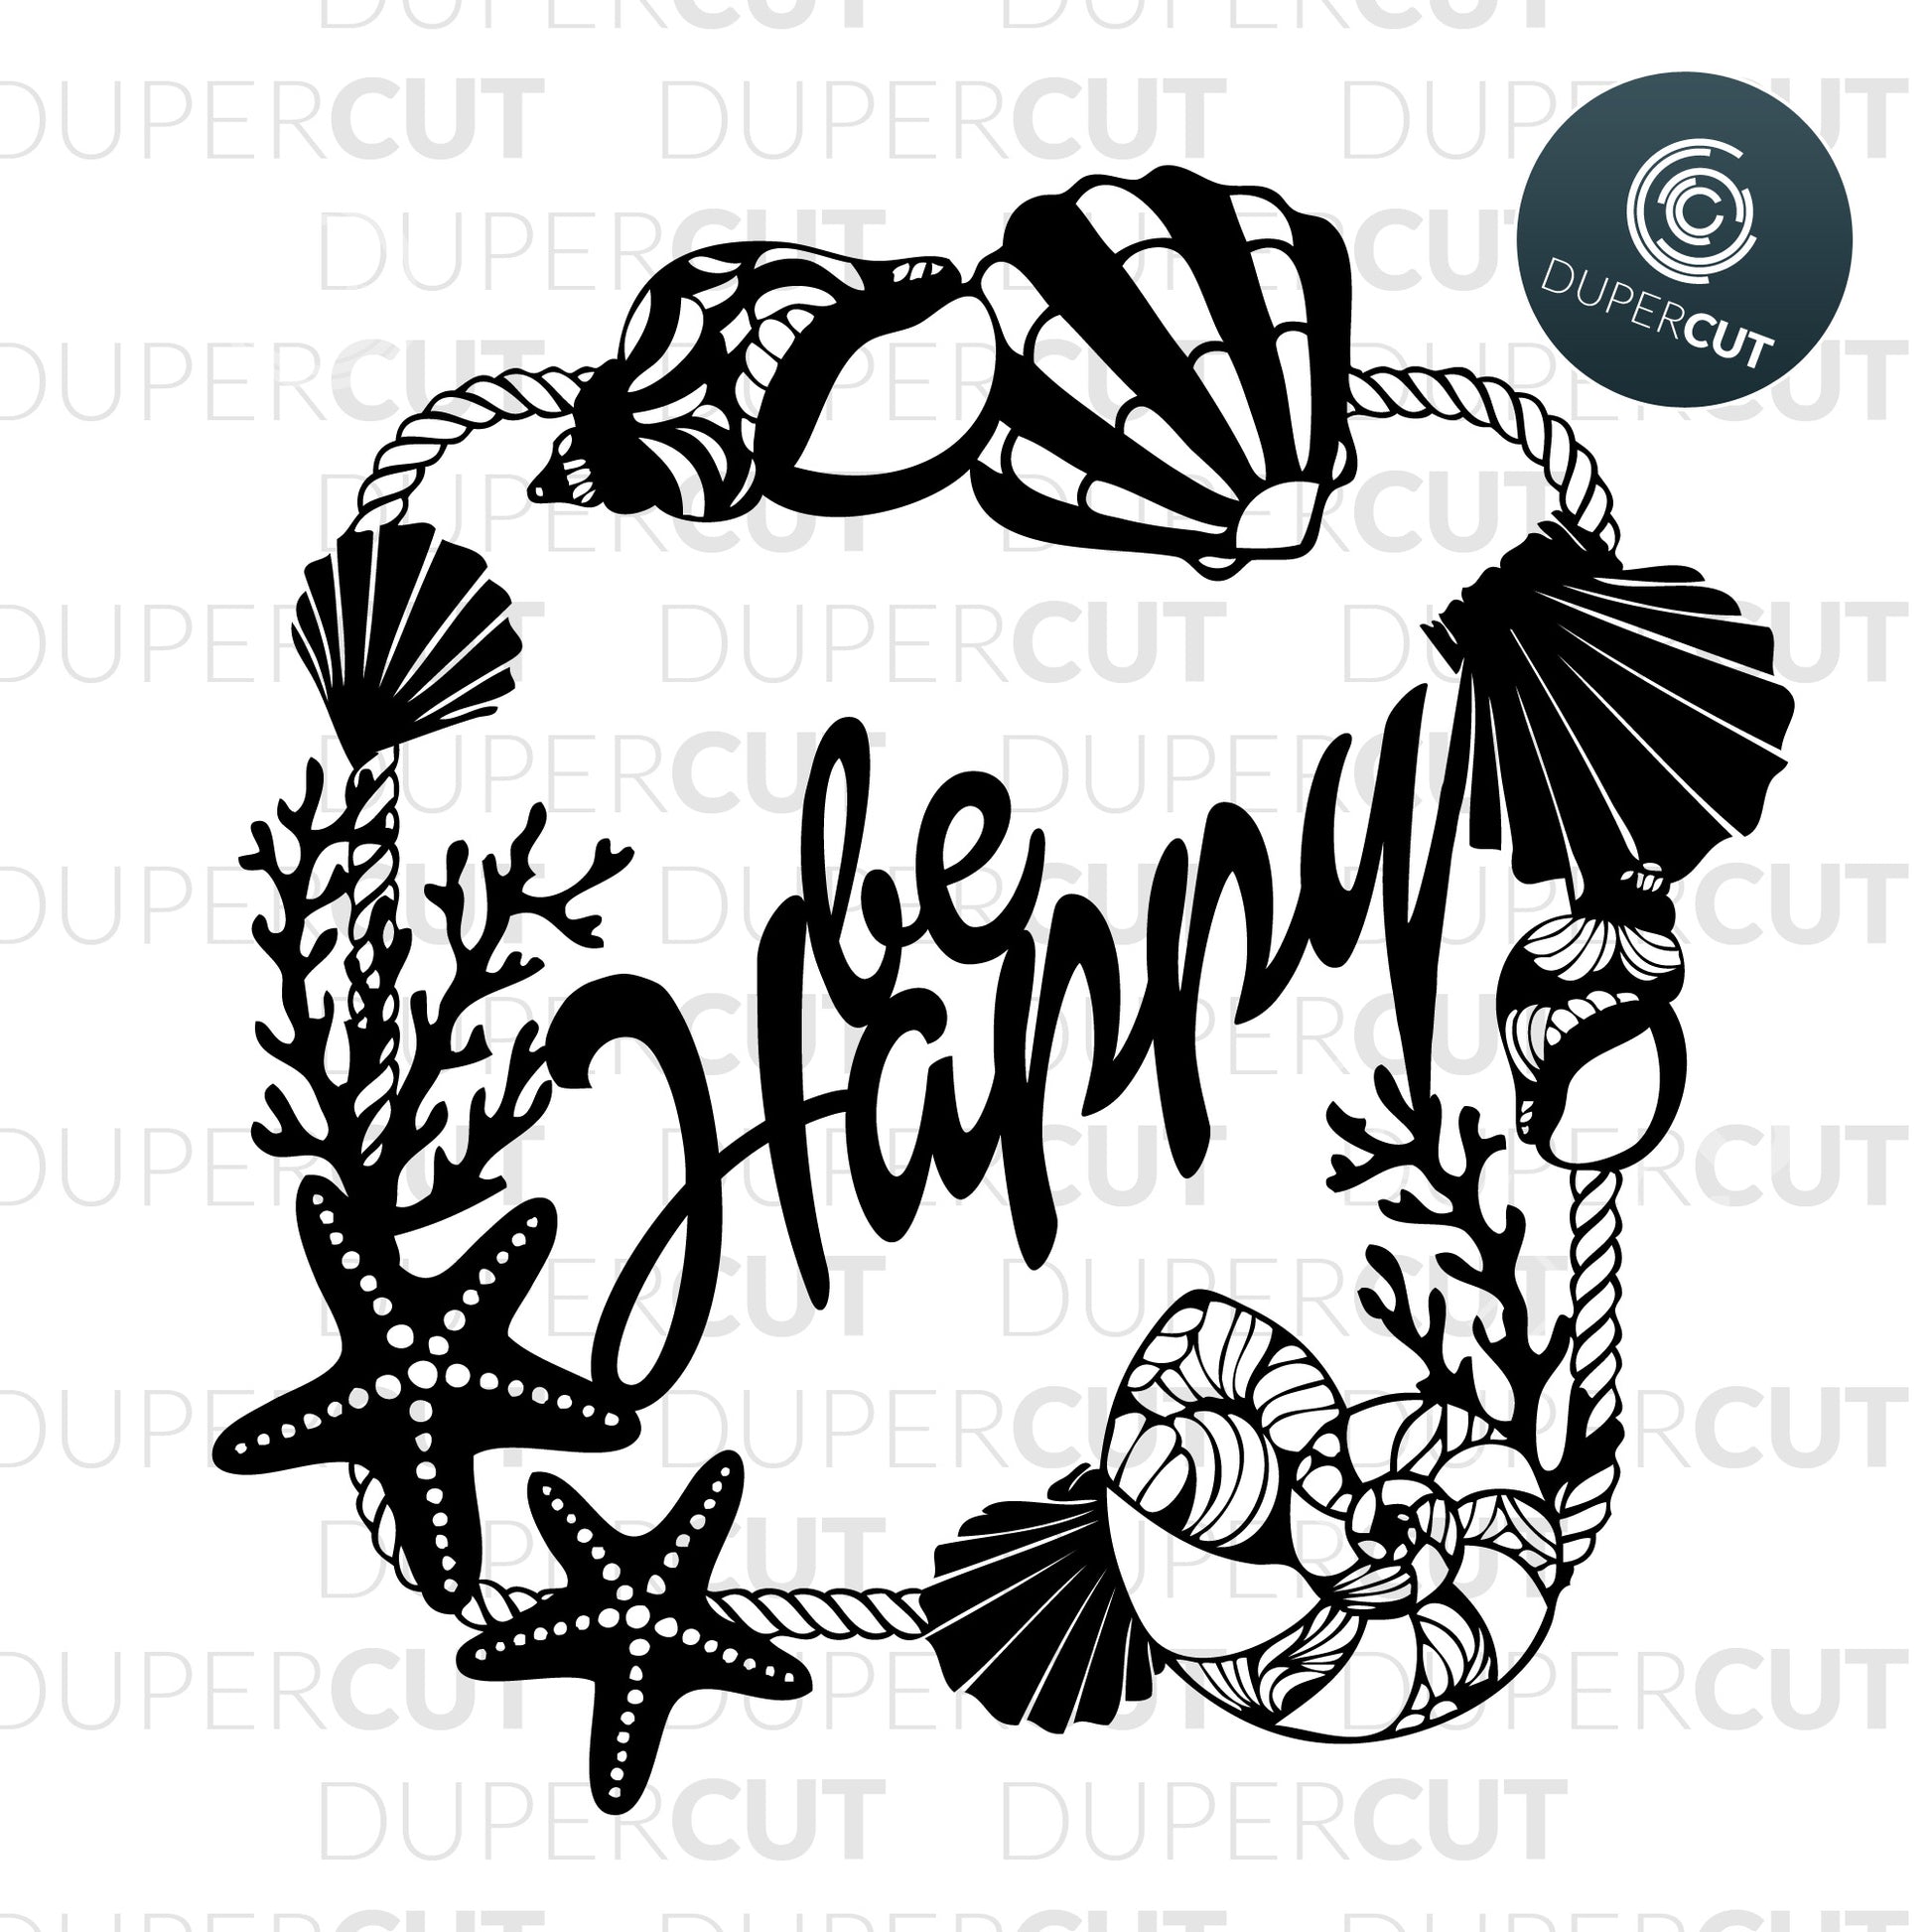 2 Designs - BE HAPPY / RELAX REFRESH REVIVE - SVG / PDF / DXF by  DuperCut.